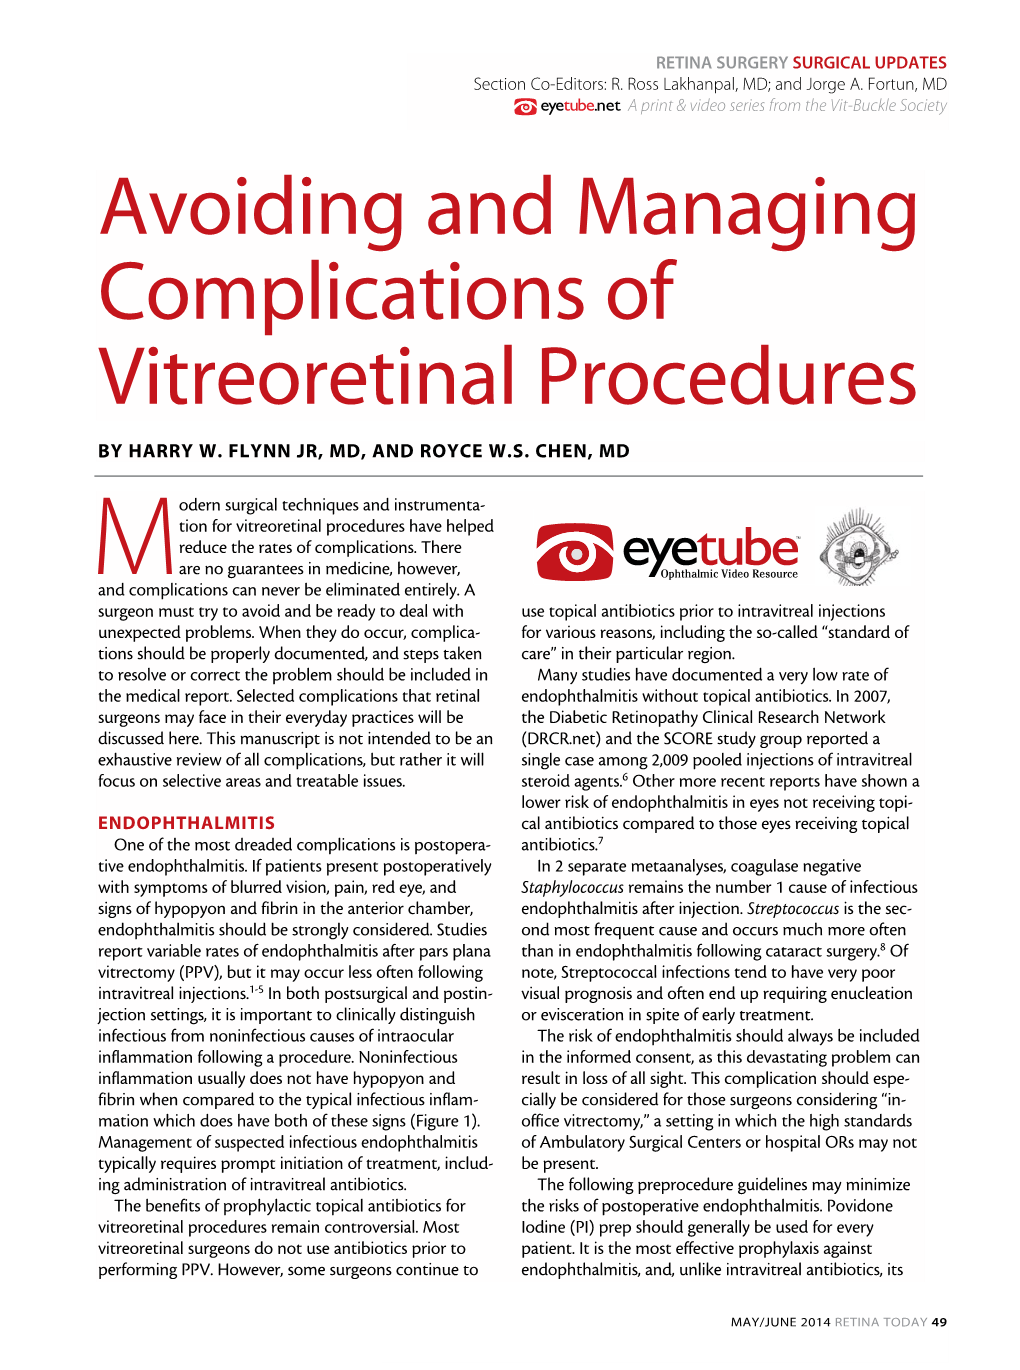 Avoiding and Managing Complications of Vitreoretinal Procedures by Harry W